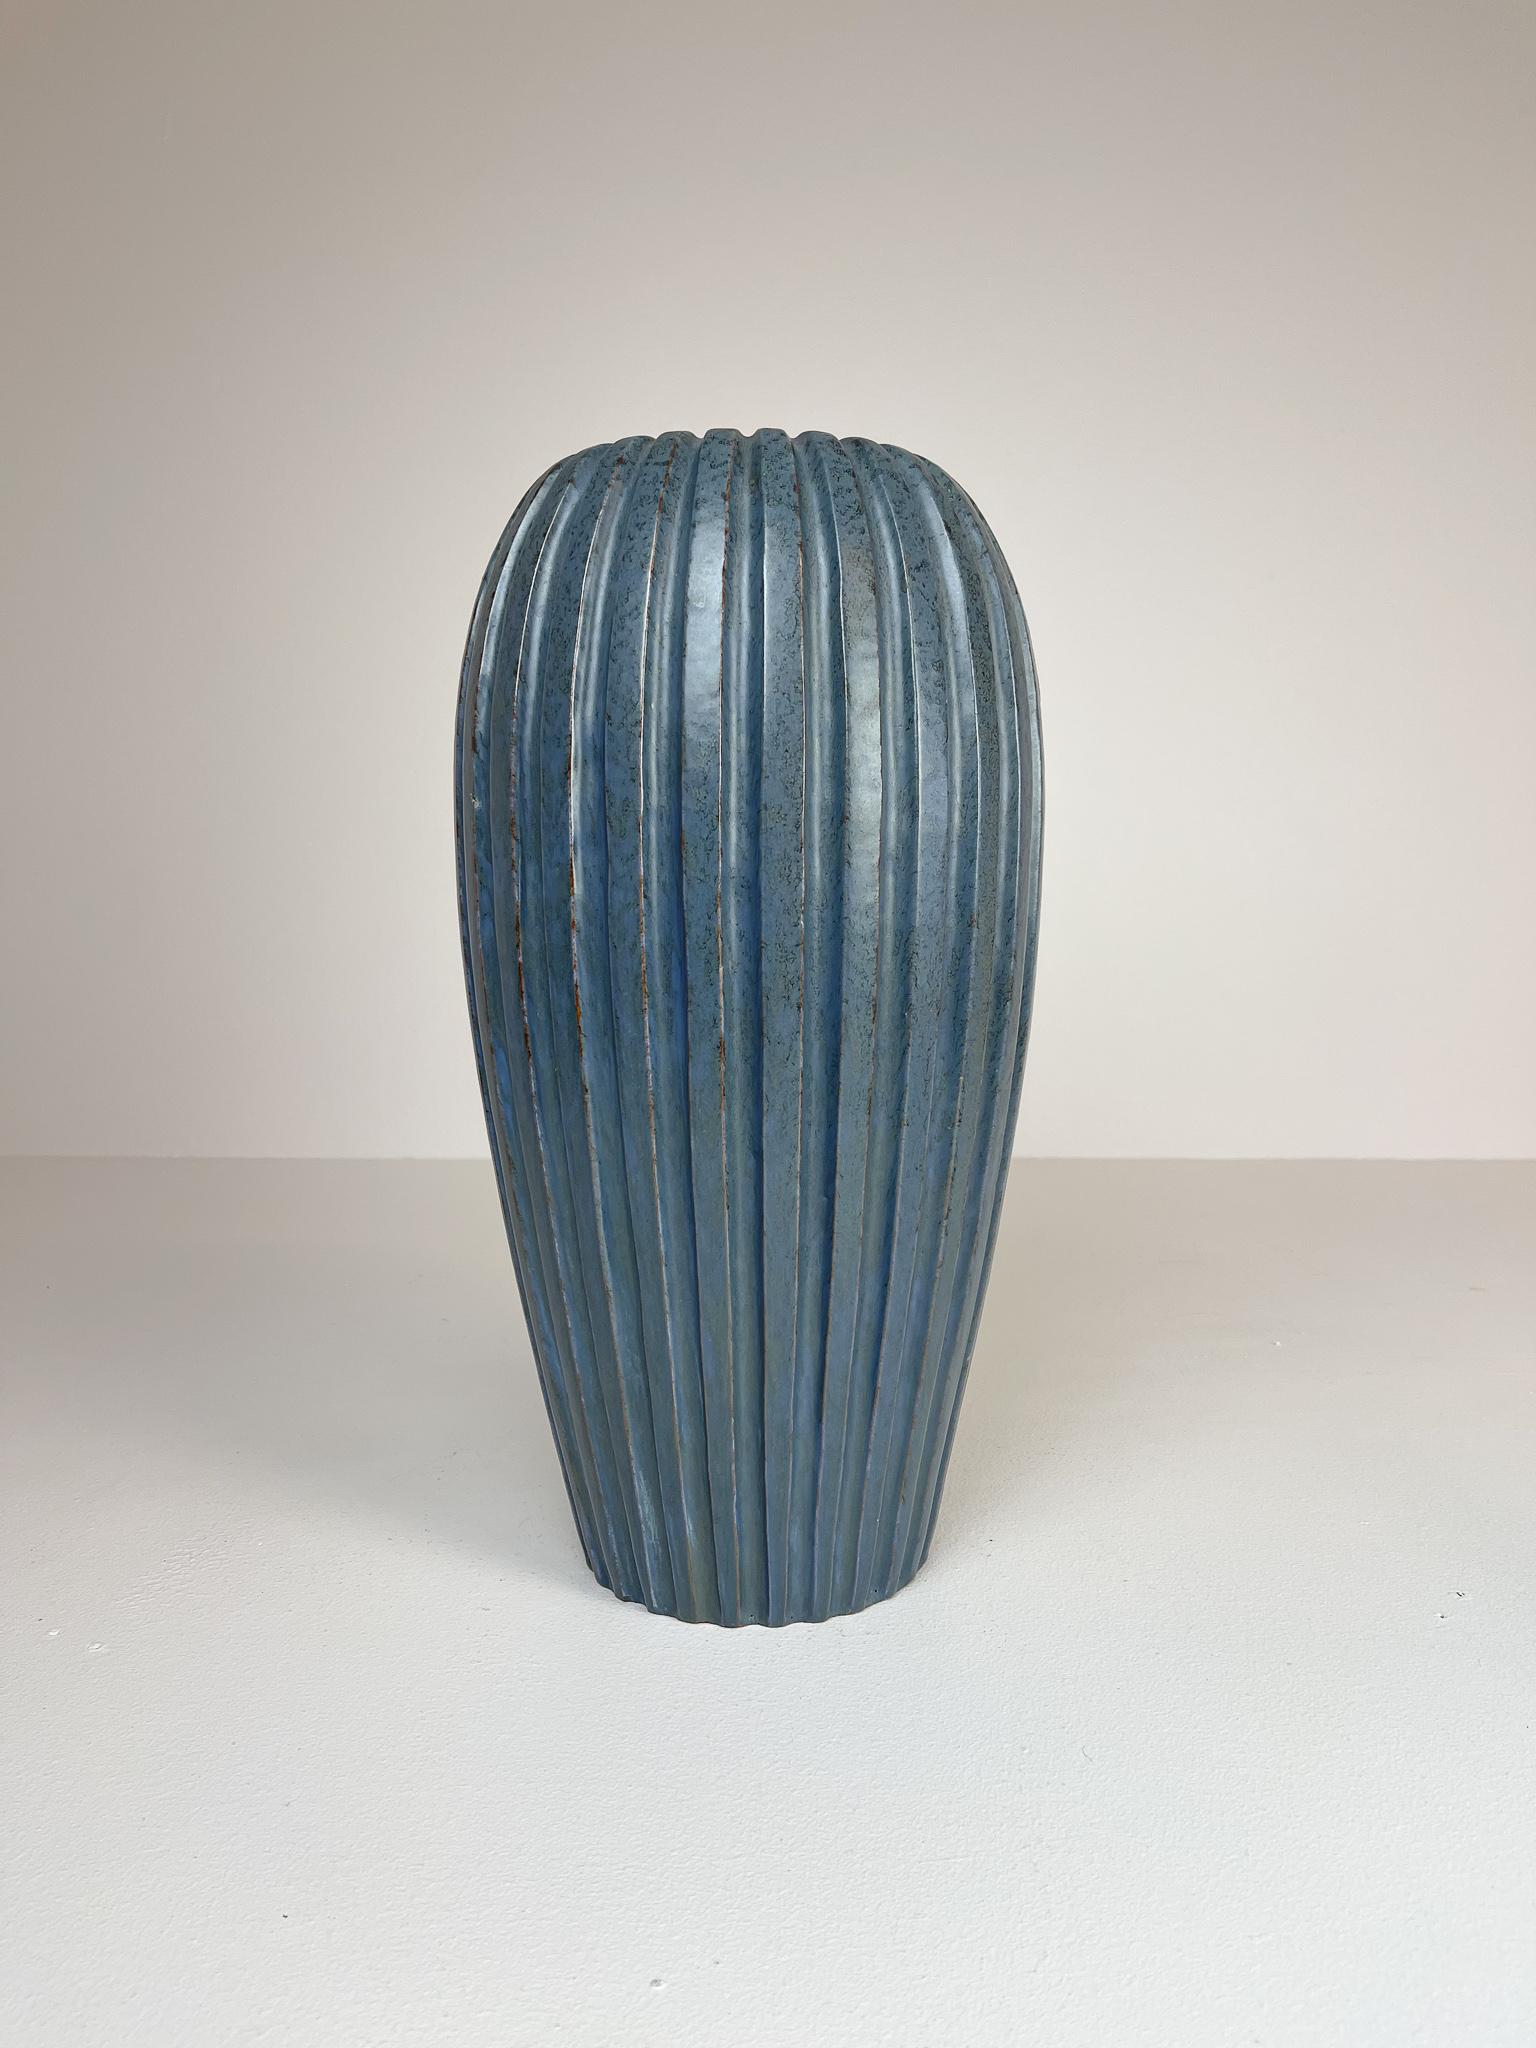 Wonderful large blue rare floor vase. Produced at Ekeby and designed by Vicke Lindstand in the 1940s.
Its streamline shape makes it perfectly adapted to the modern home. Drilled hole on the top. This blue version of the vase is not that common to